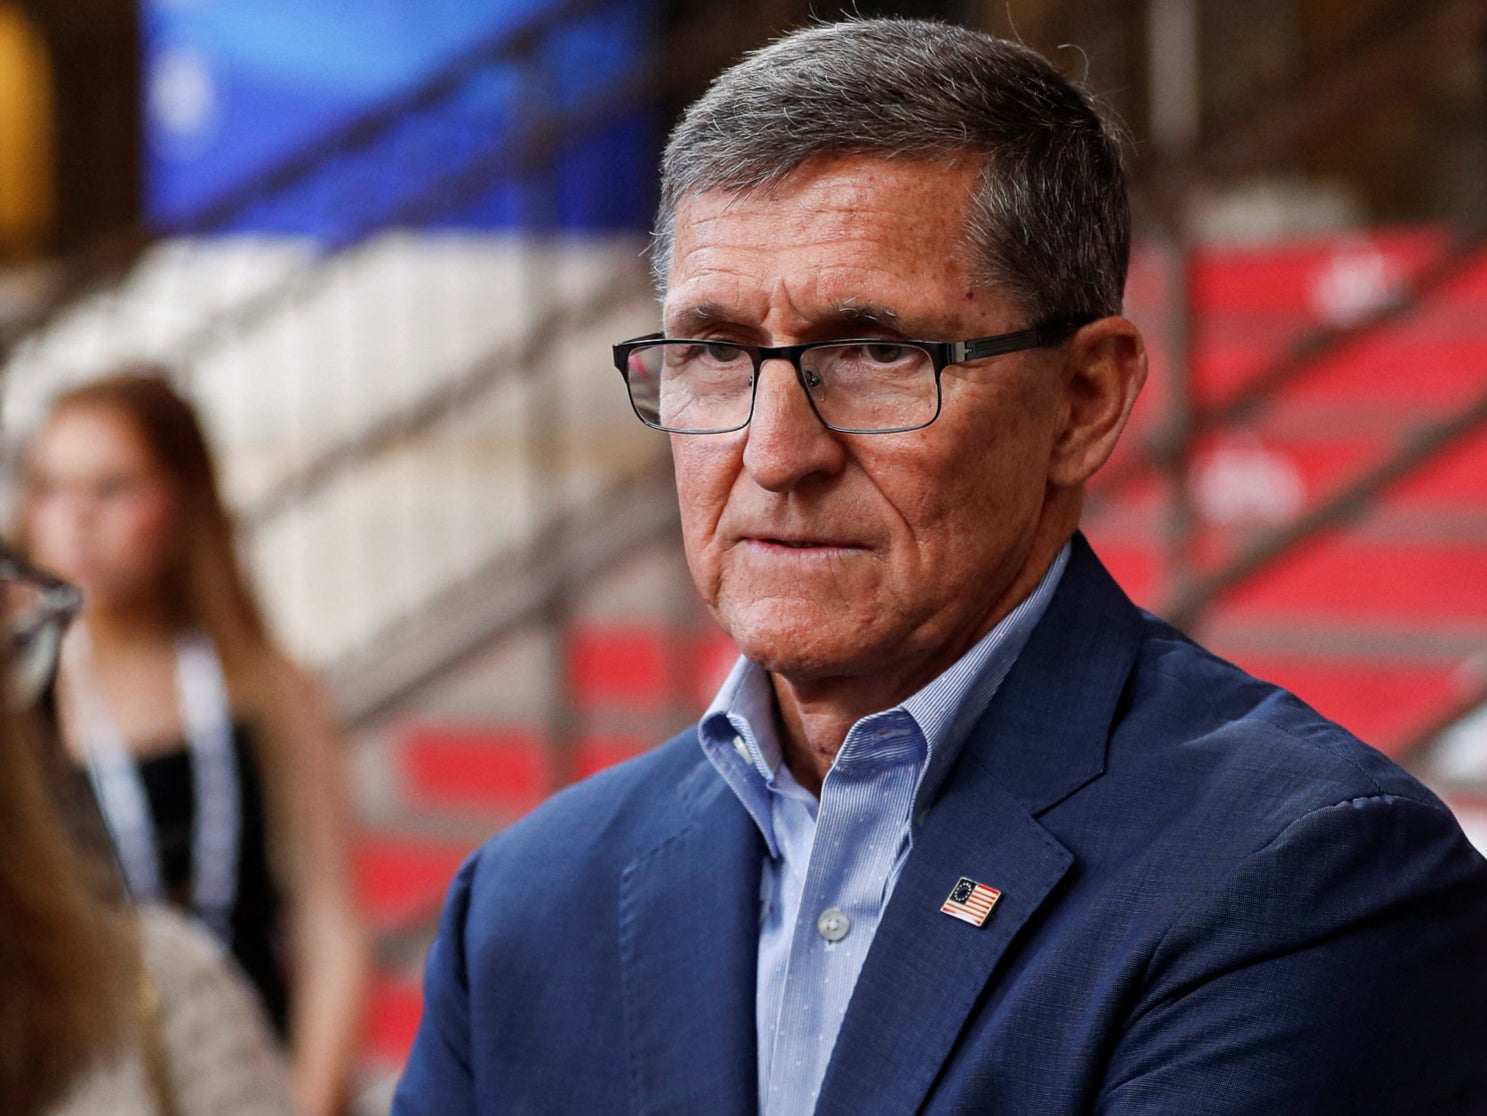 Mike Flynn at the Conservative Political Action Conference (CPAC) in Orlando